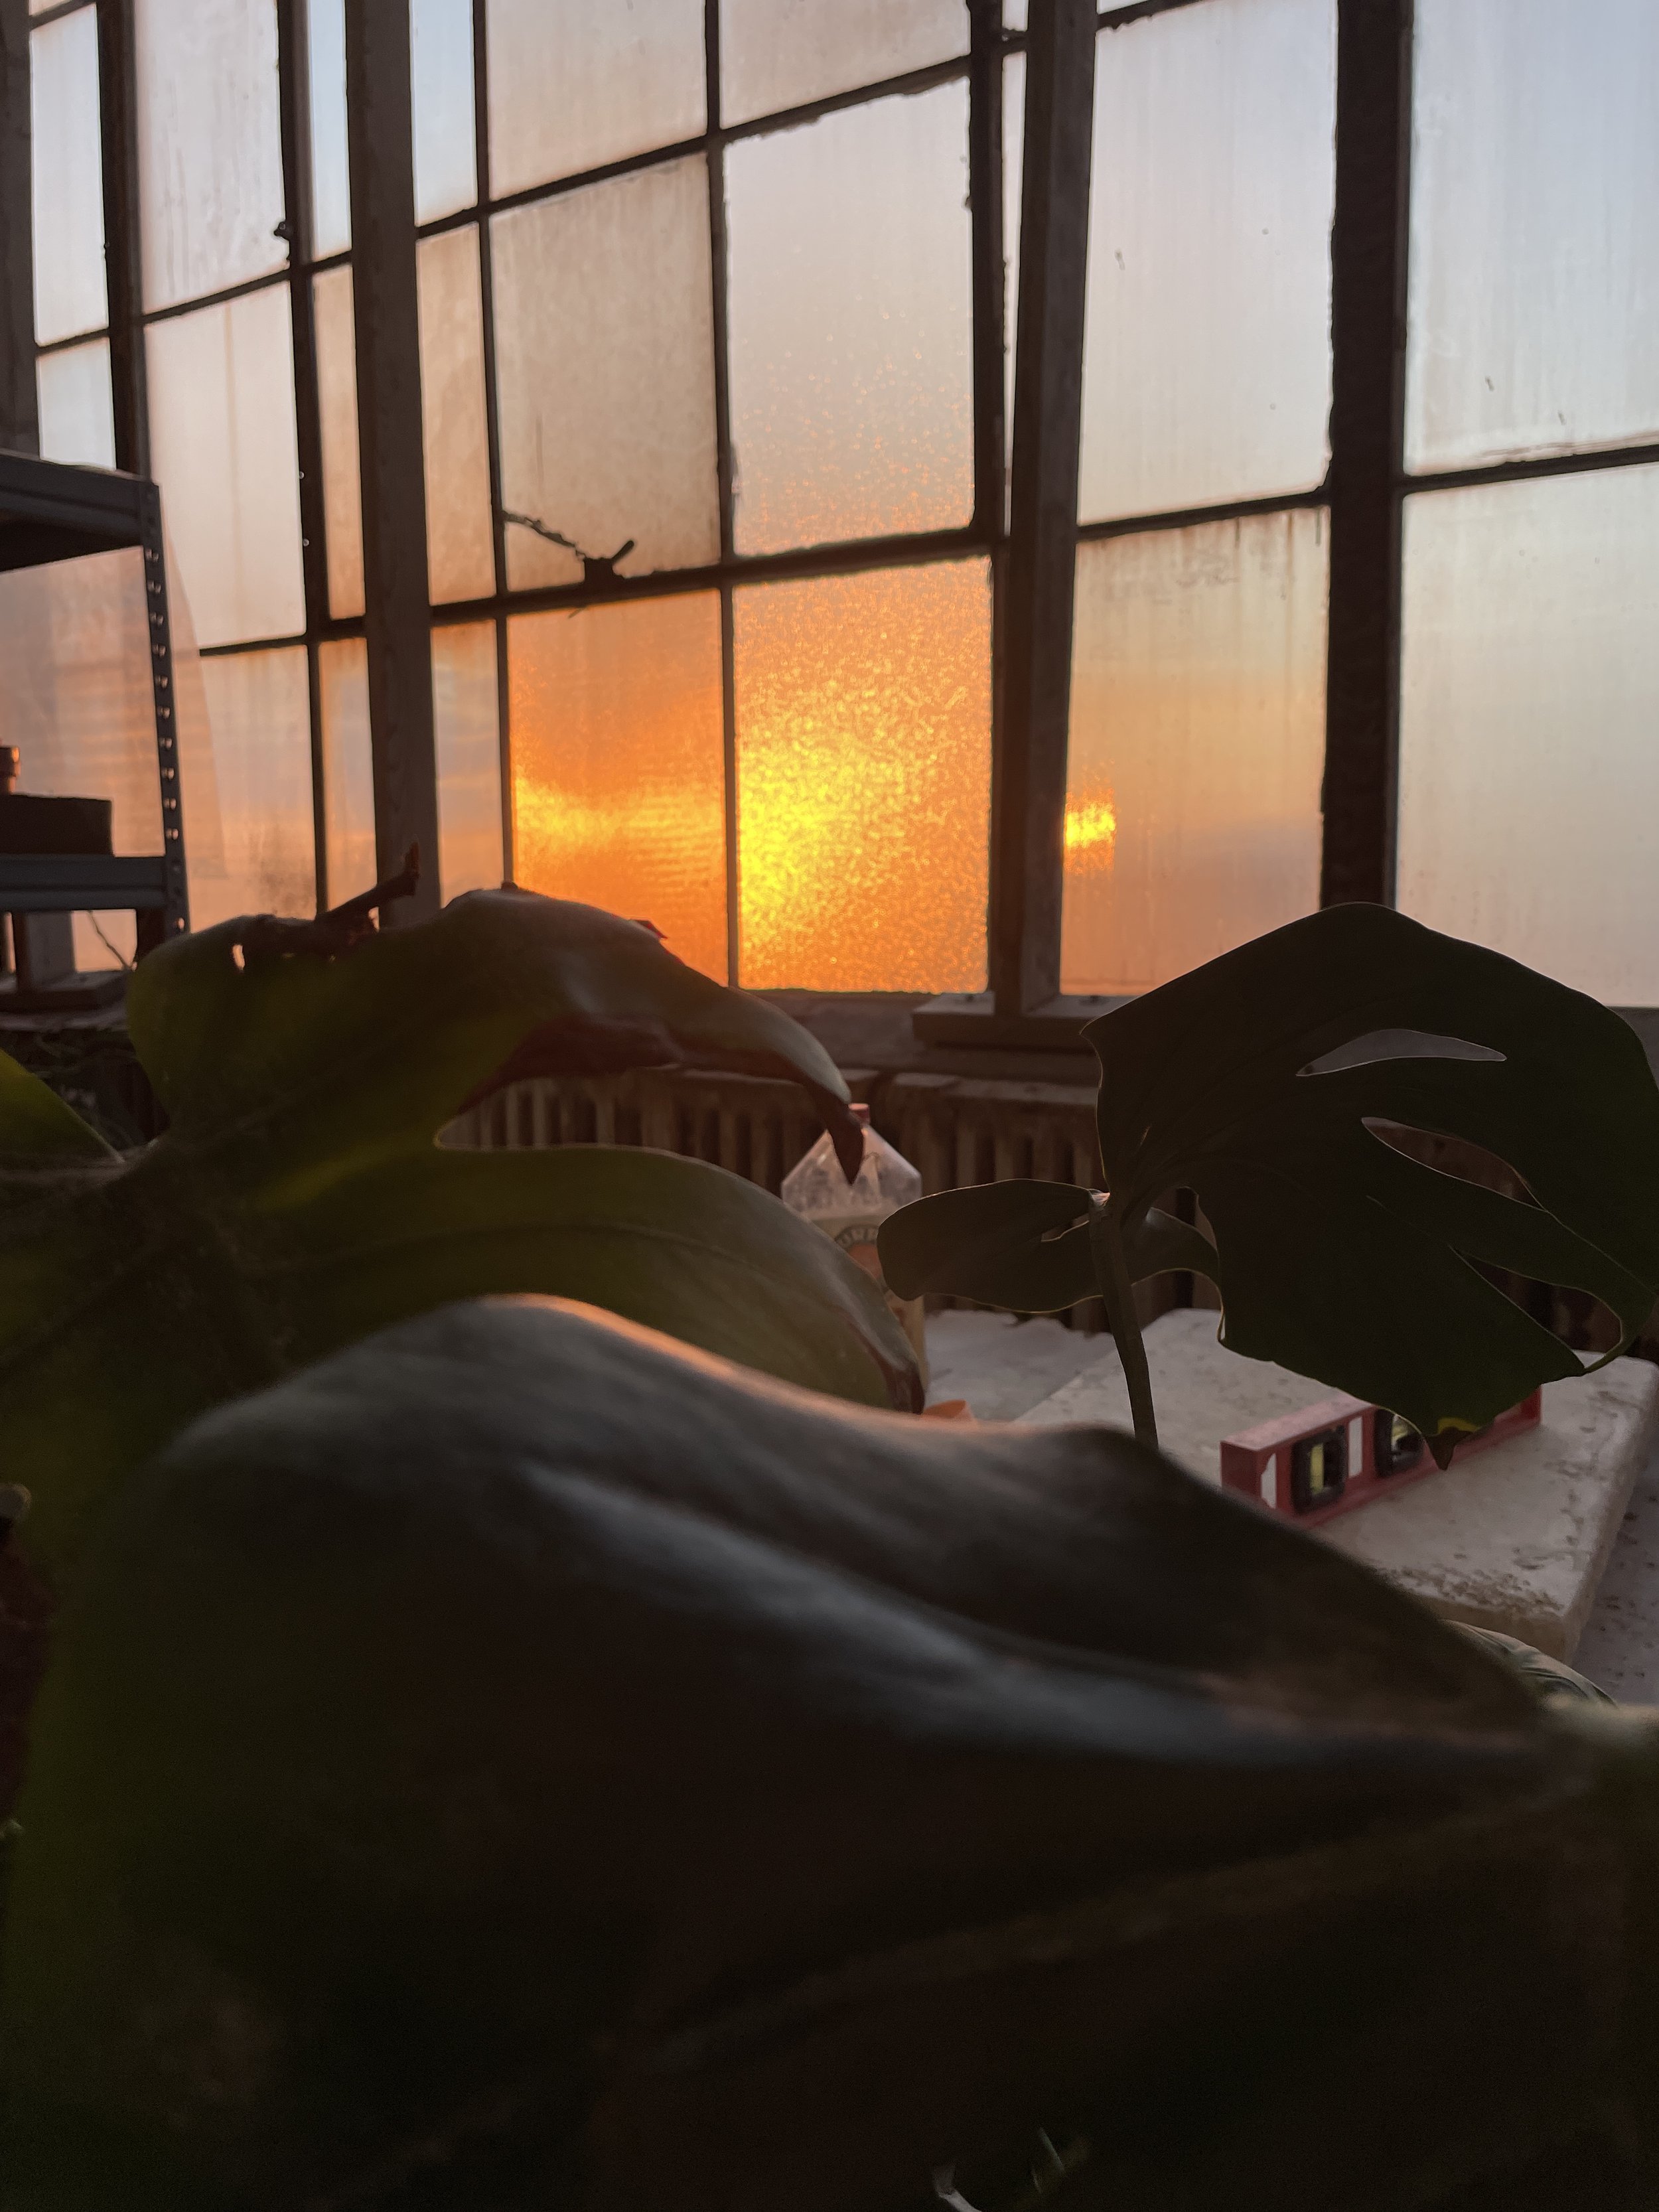  A picture of sunset through the window at Lauren HB Studio 